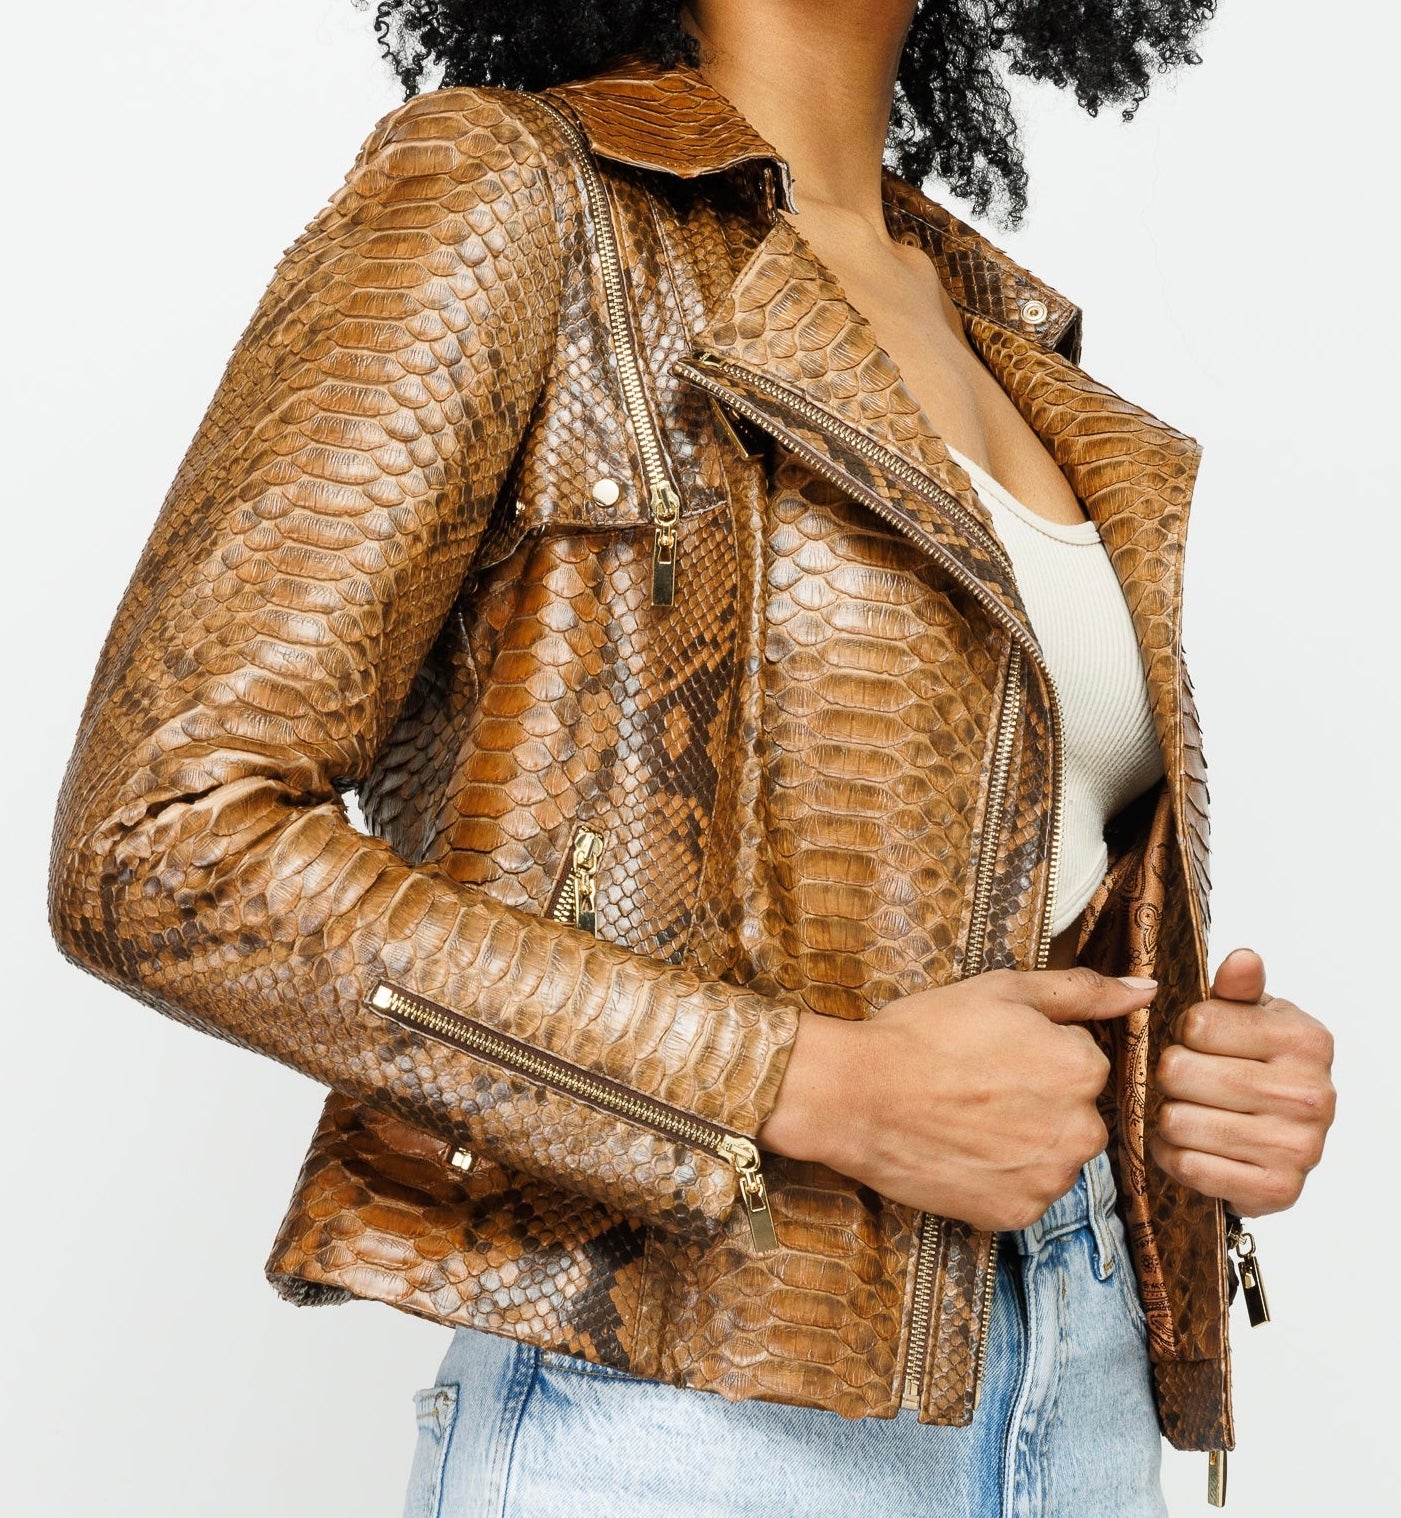 The Queen Pythn Skin Tan Leather Jacket